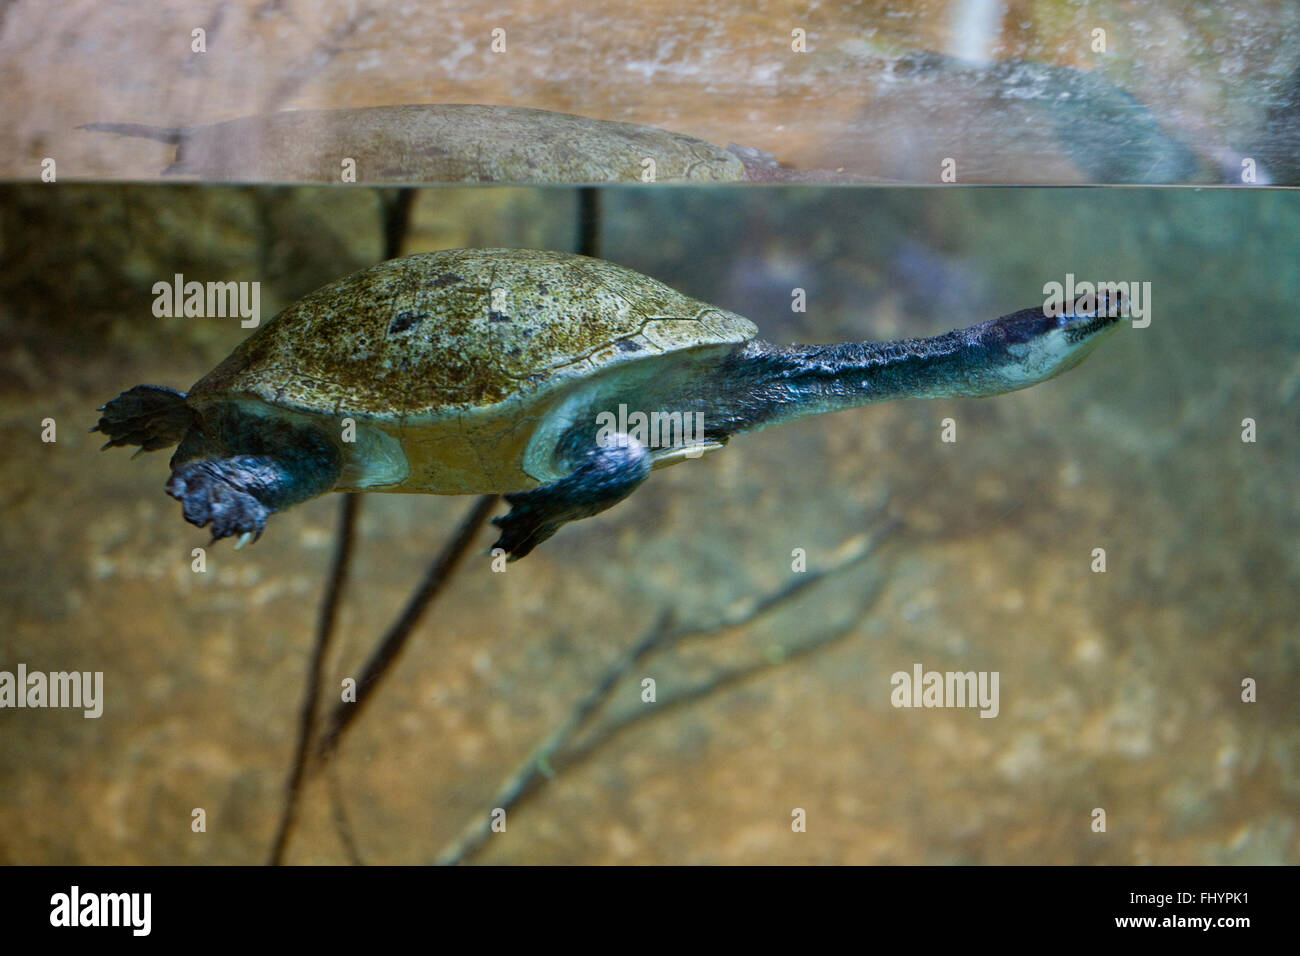 A TURTLE swimming in a tank at the SAN DIEGO ZOO - CALIFORNIA Stock Photo